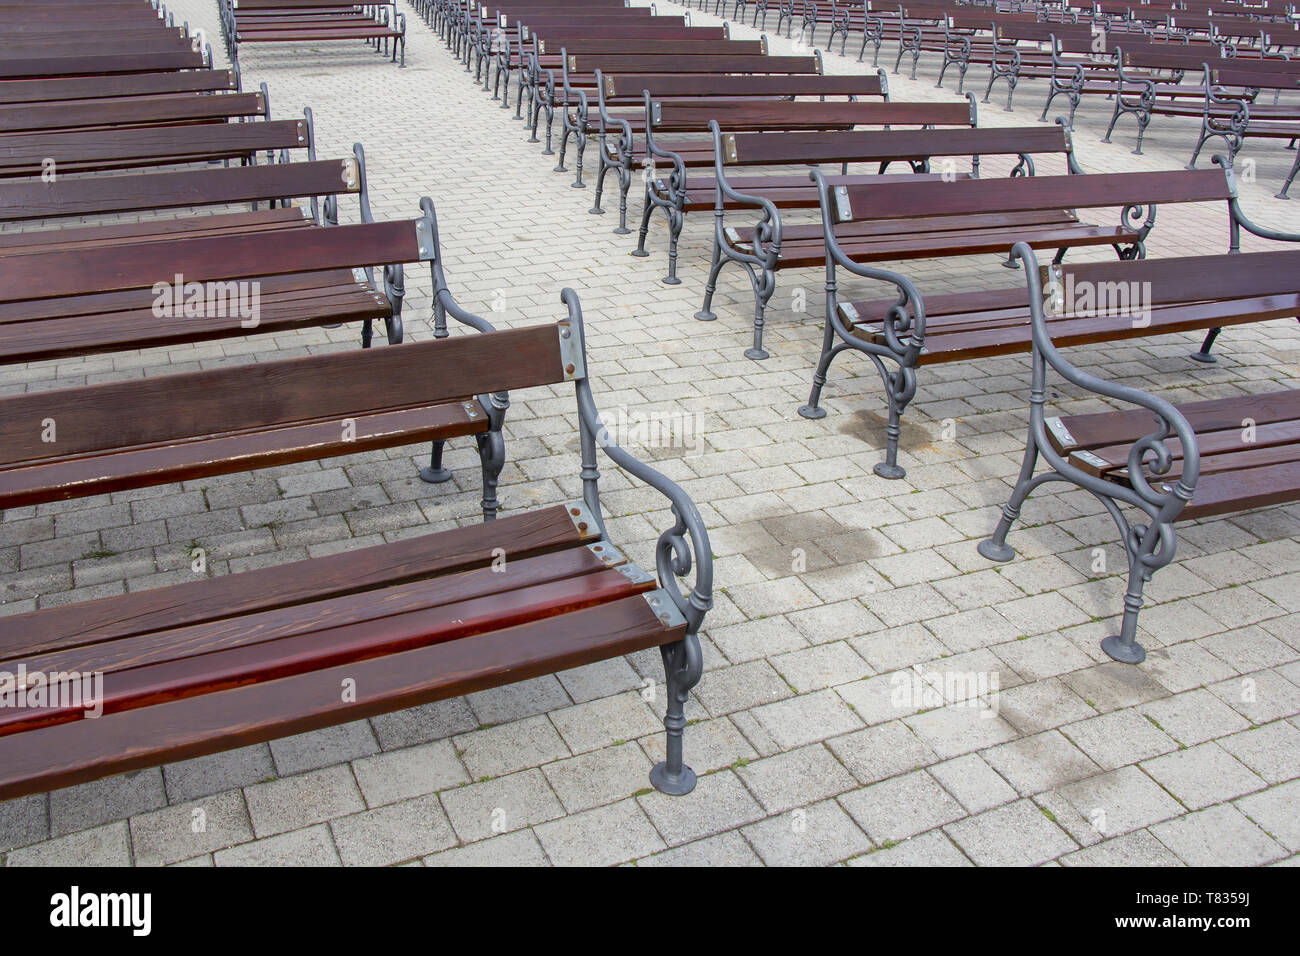 Lot of Rows of empty brown wooden benches Stock Photo